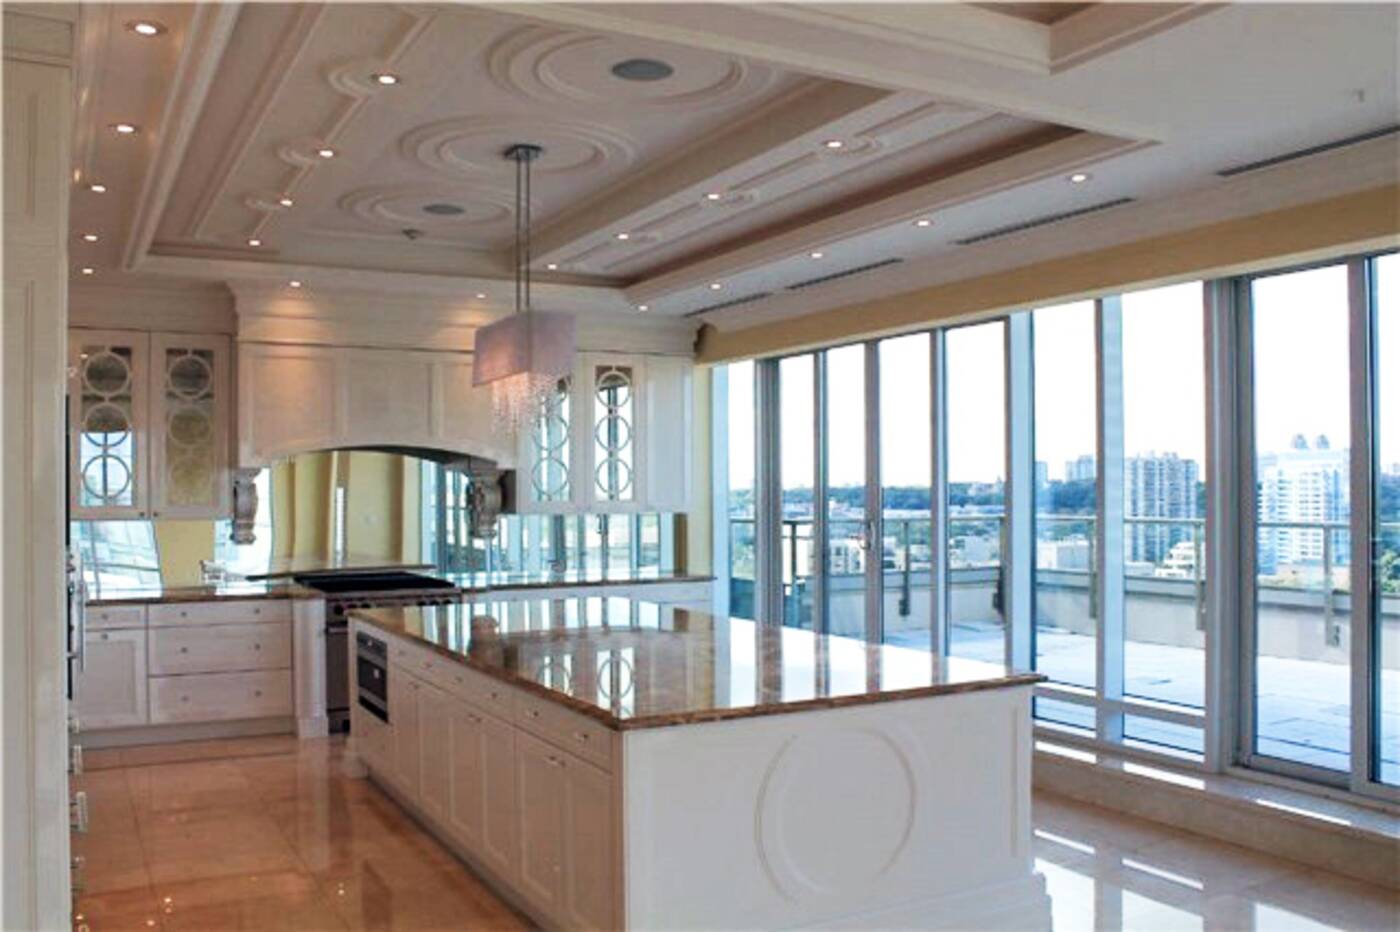 The 5 most expensive condos for sale in Toronto right now